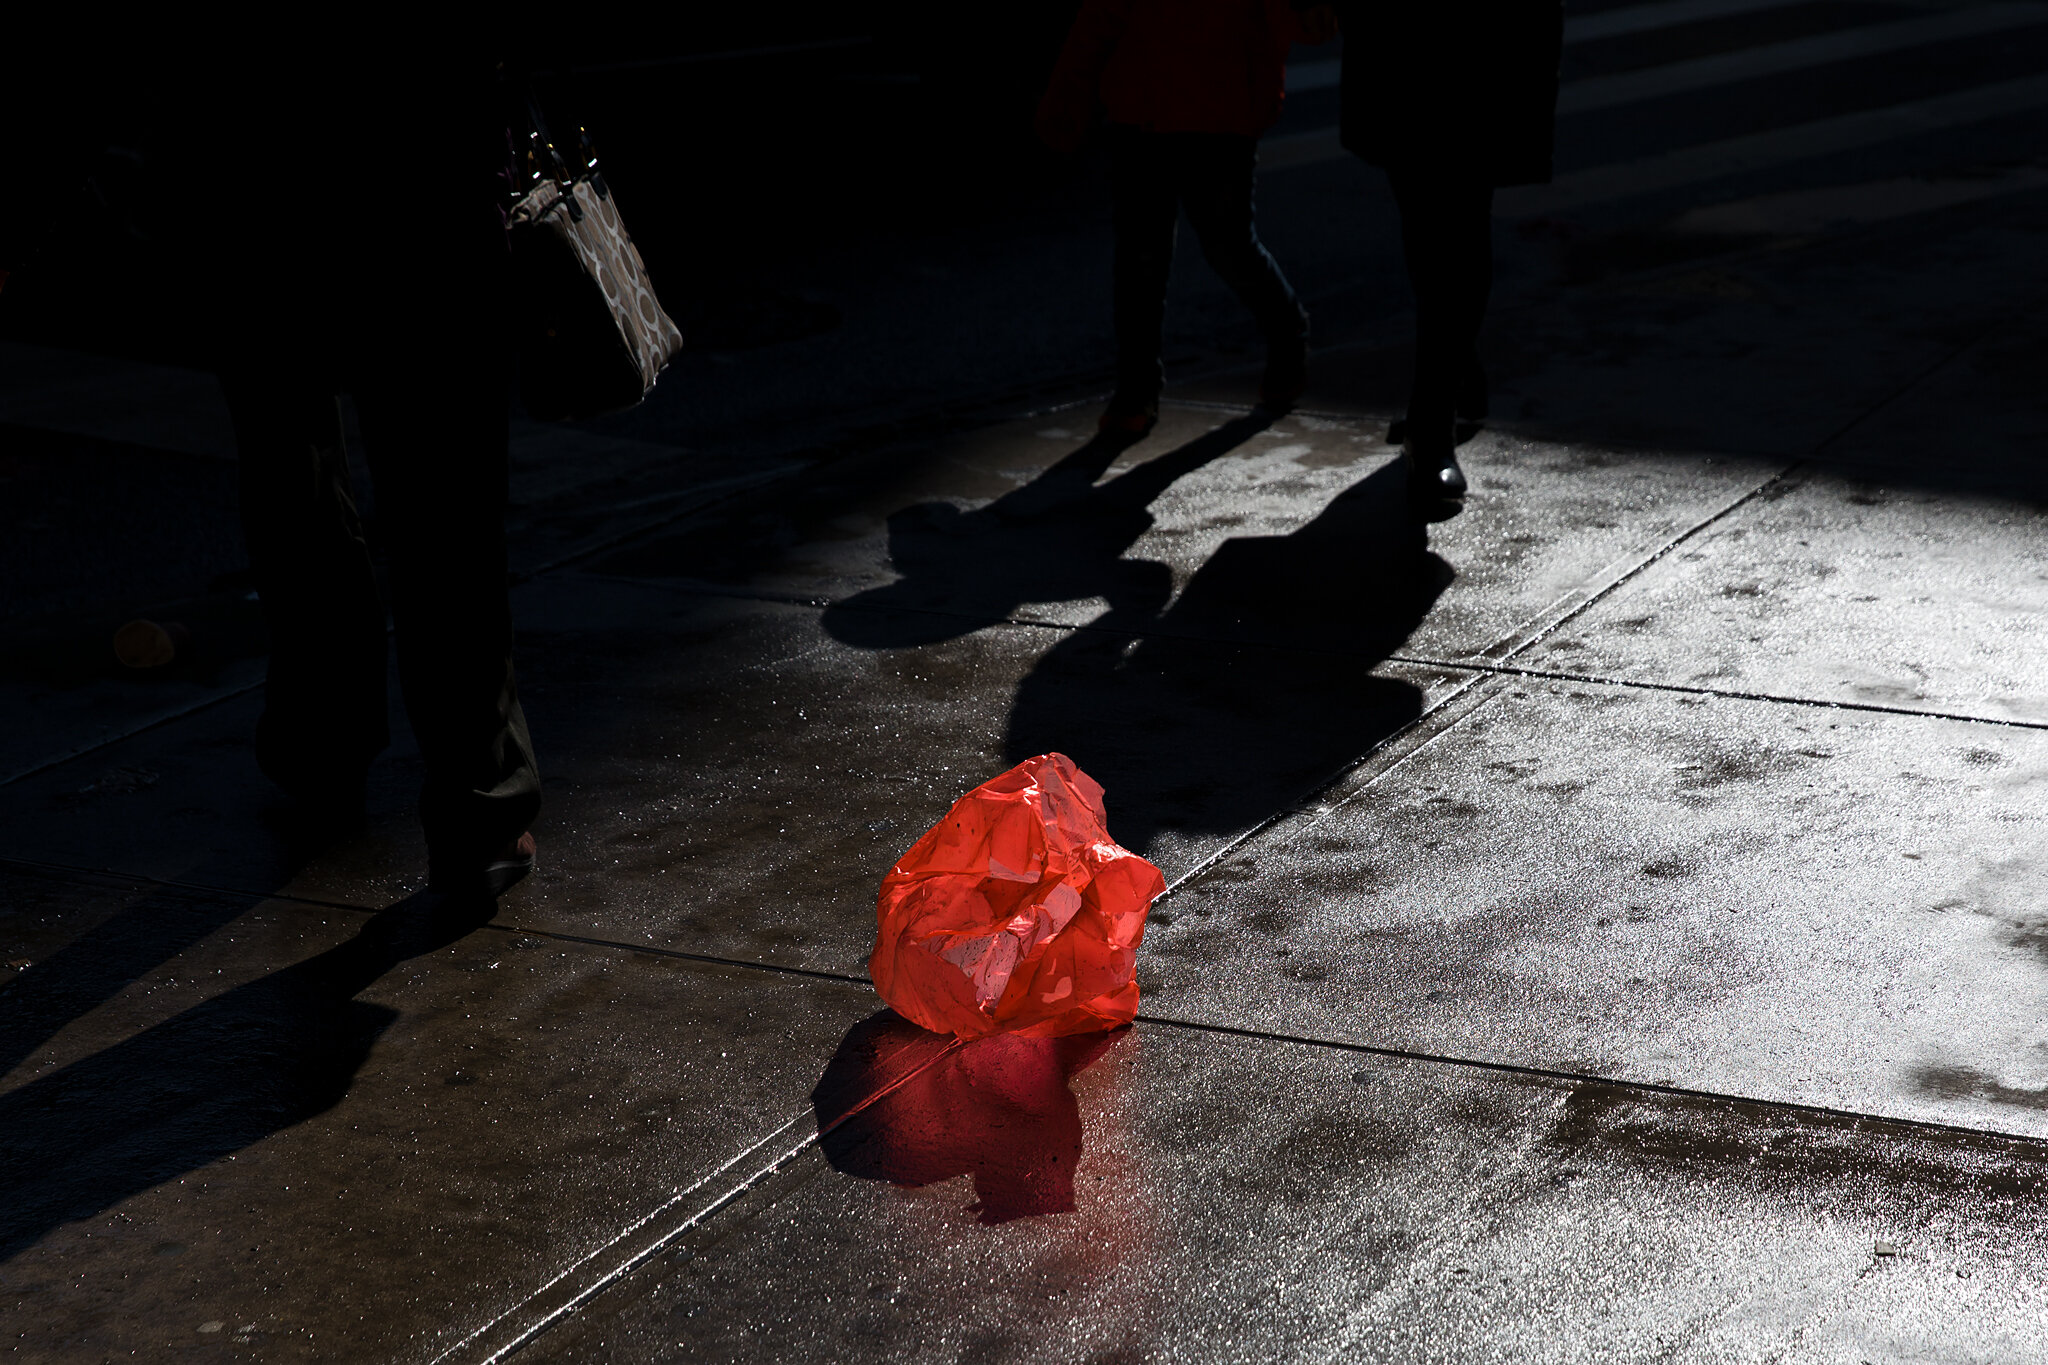 Red Bags of Chinatown by James Prochnik_K9A4344.jpg